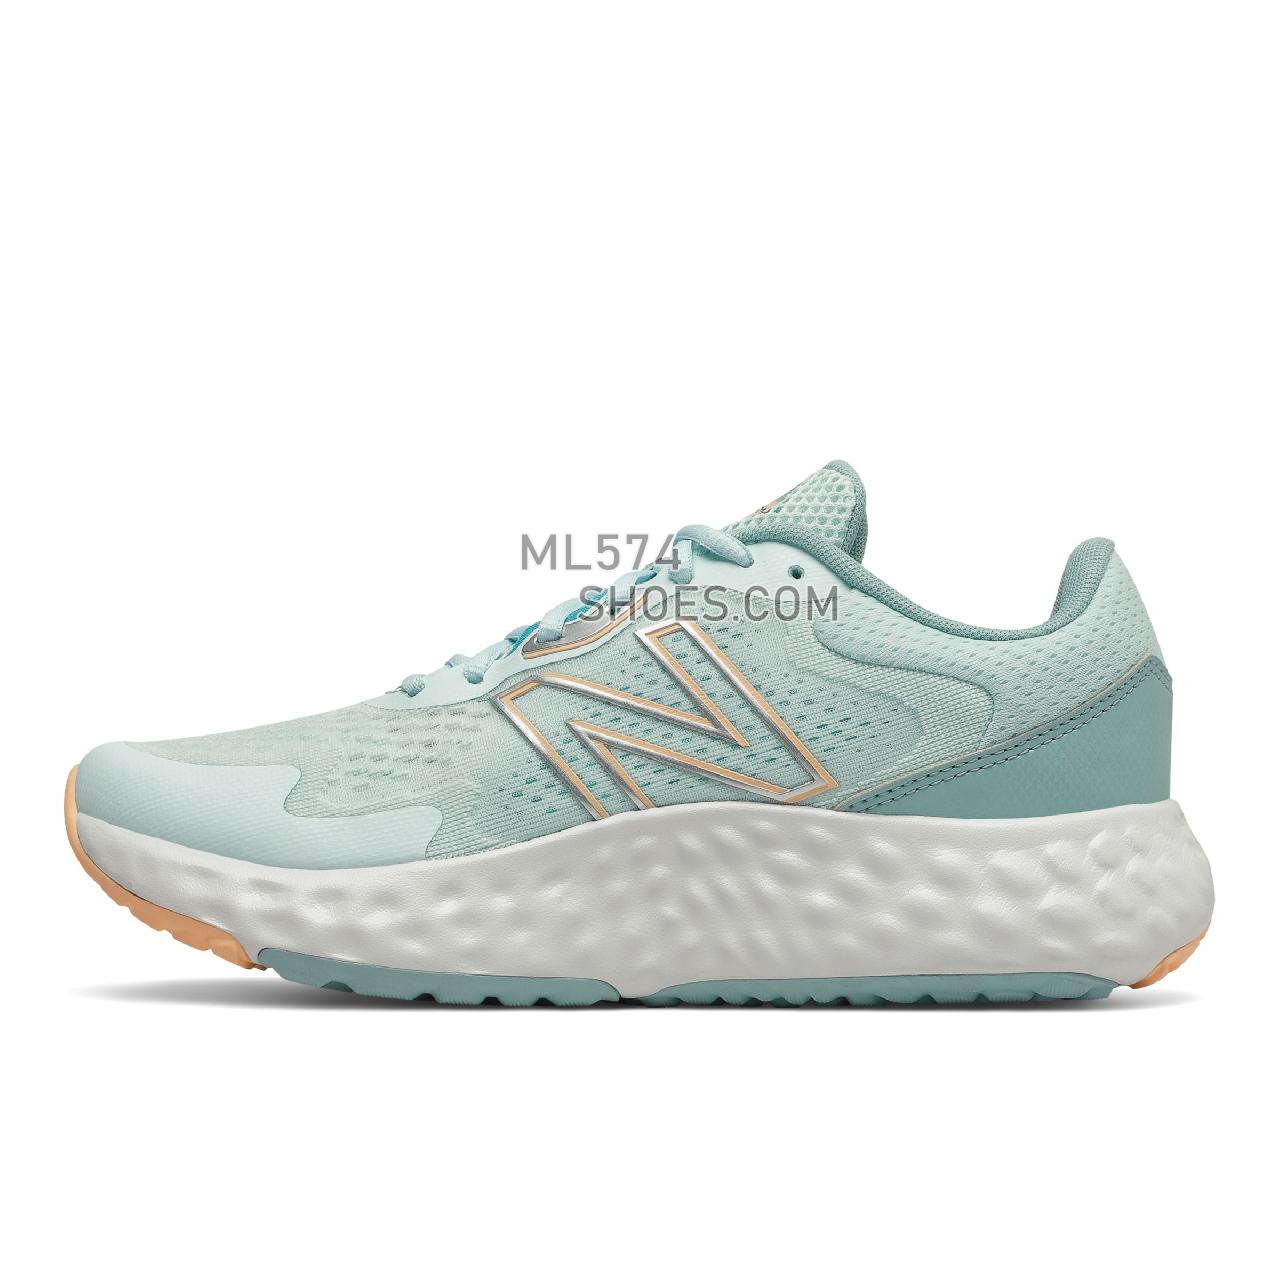 New Balance WEVOZV1 - Women's Classic Sneakers - White with Pale Blue Chill - WEVOZCM1